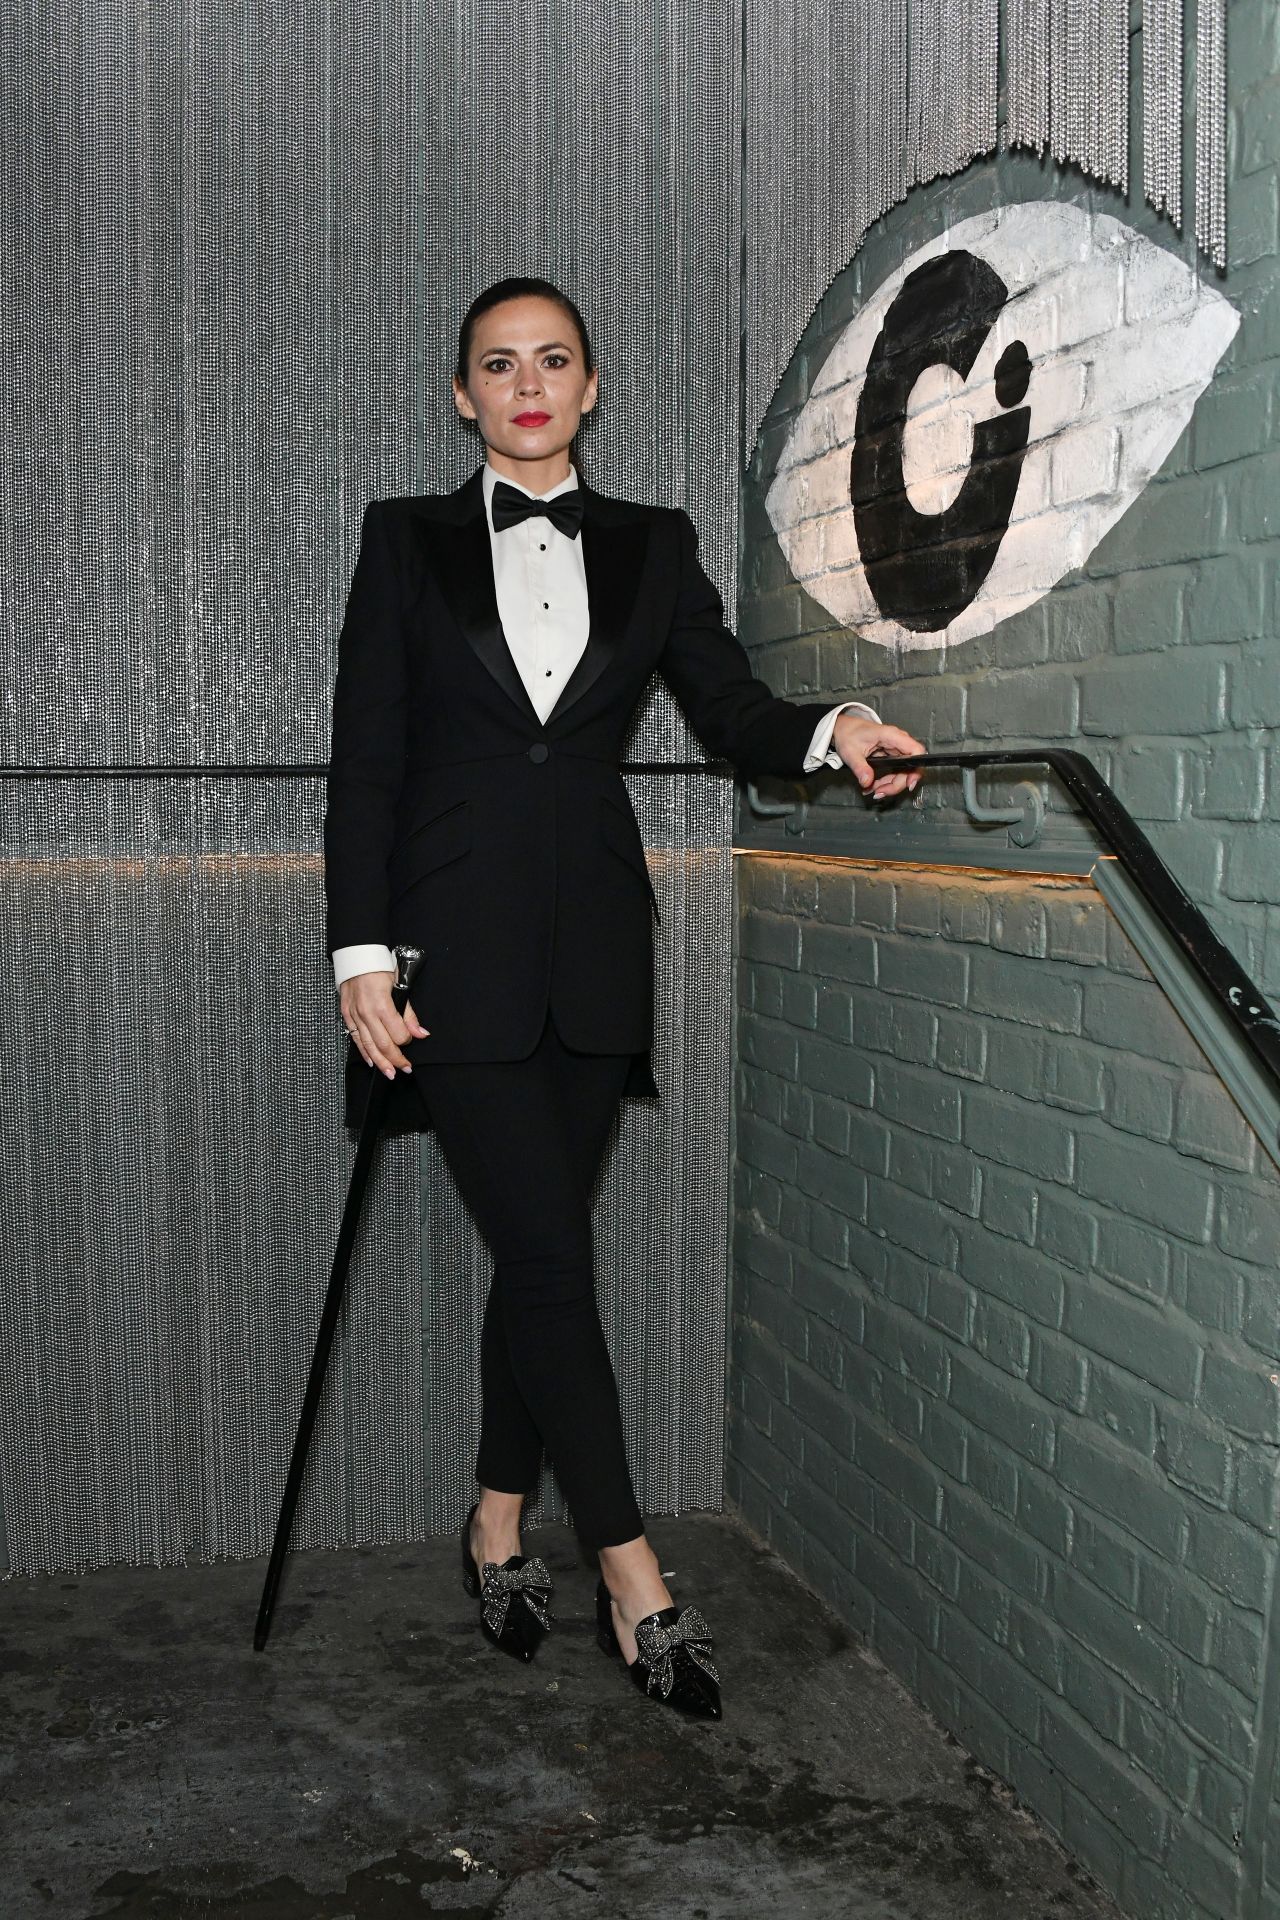 Hayley Atwell Hayley-atwell-cabaret-at-the-kit-kat-club-first-gala-performance-in-london-12-11-2021-3